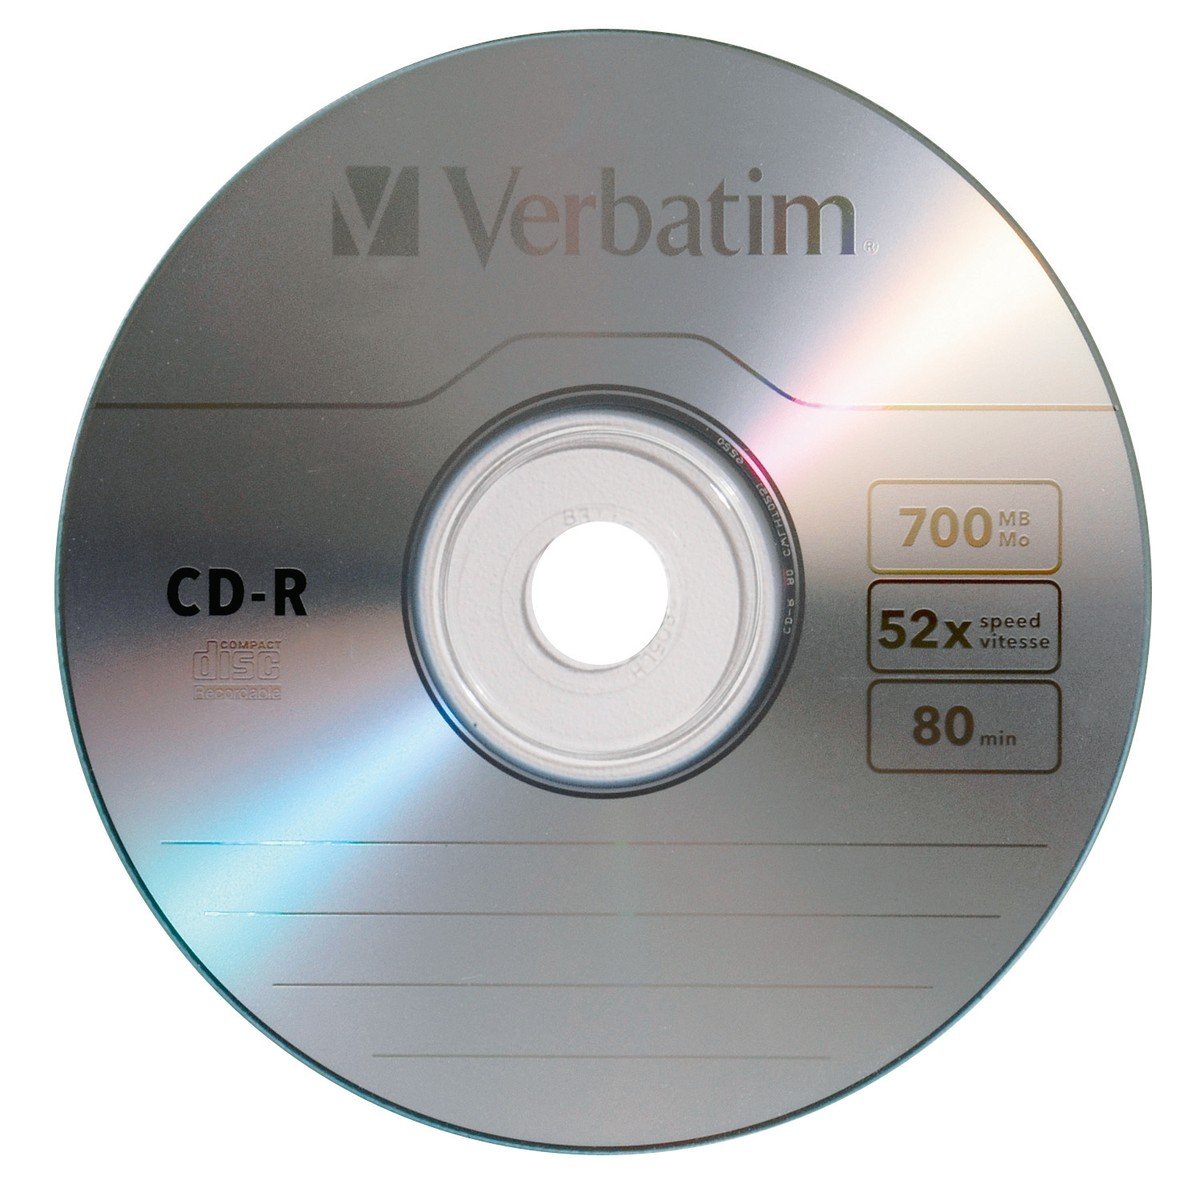 Verbatim CD-R Blank Discs 700MB 80 Minutes 52x Recordable Disc for Data and Music - 50 Pack Spindle,Silver